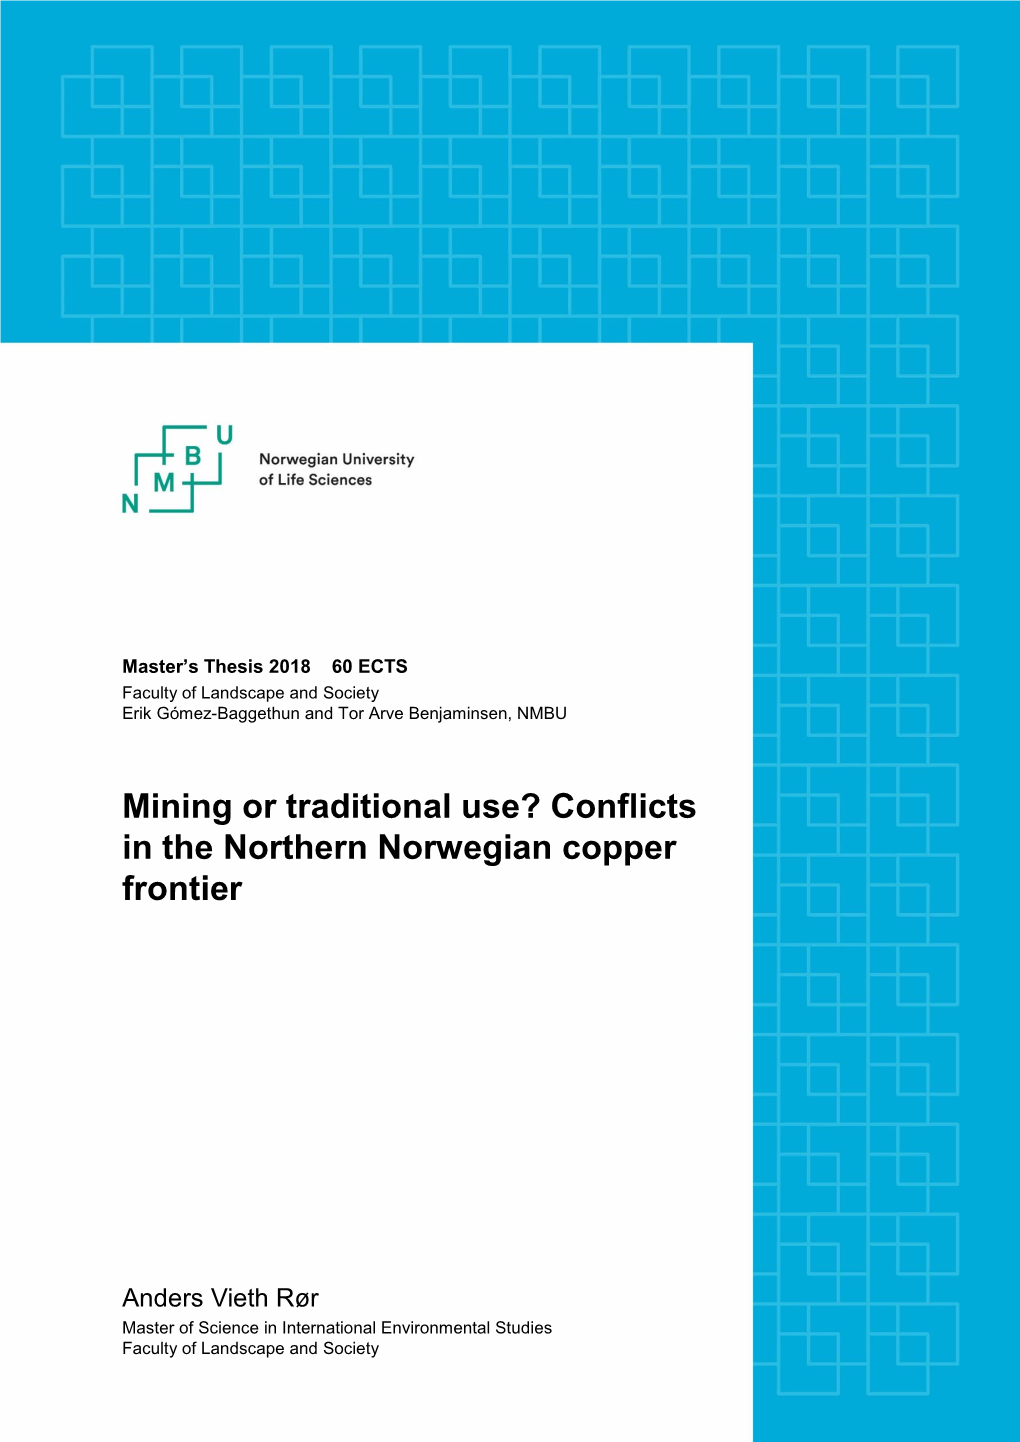 Mining Or Traditional Use? Conflicts in the Northern Norwegian Copper Frontier